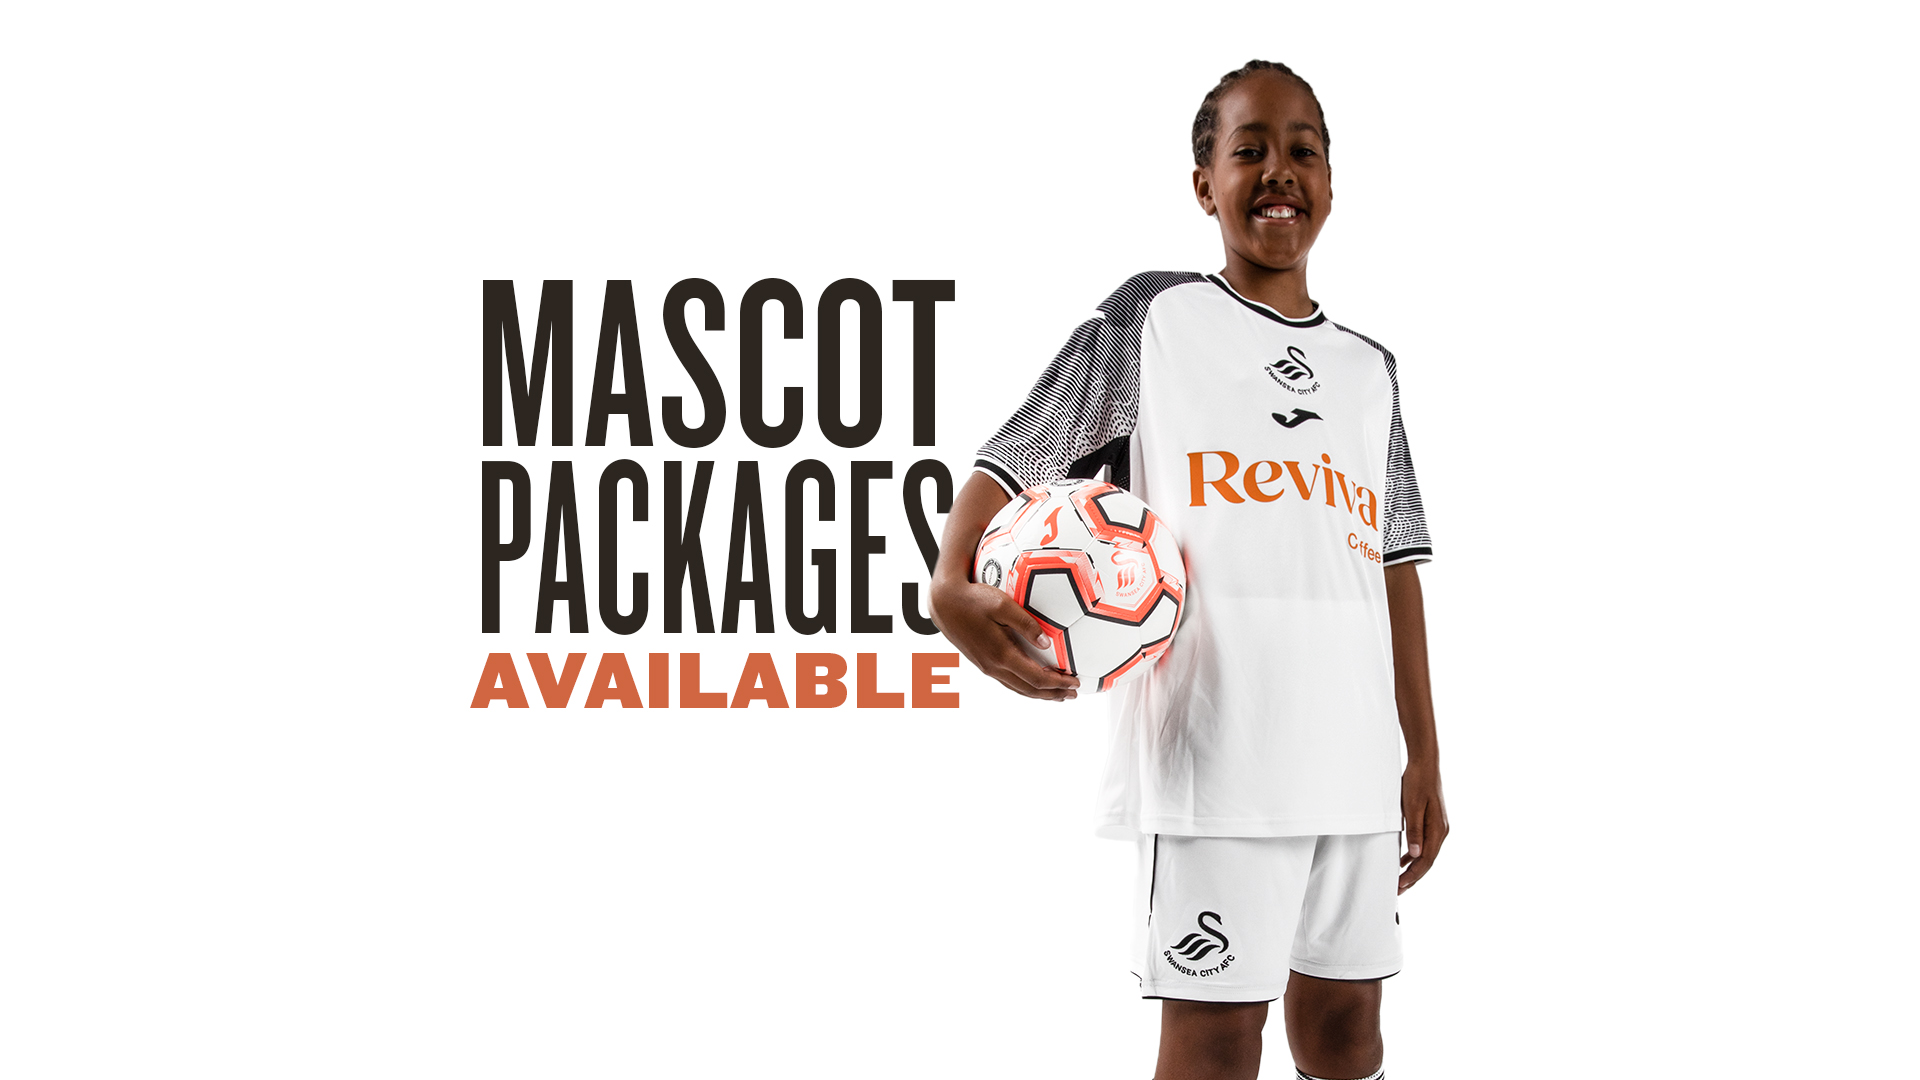 mascot packages